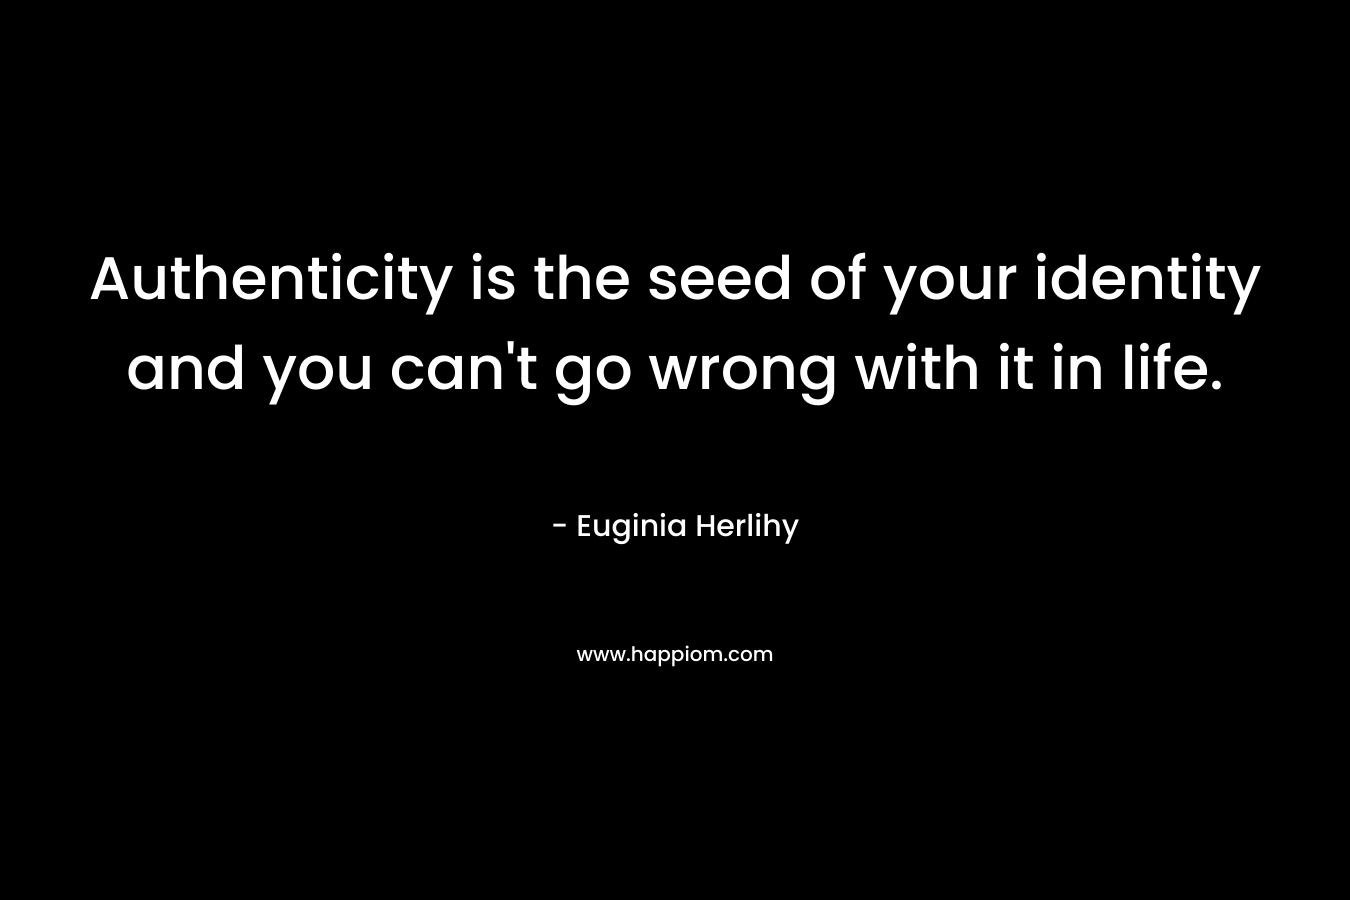 Authenticity is the seed of your identity and you can't go wrong with it in life.